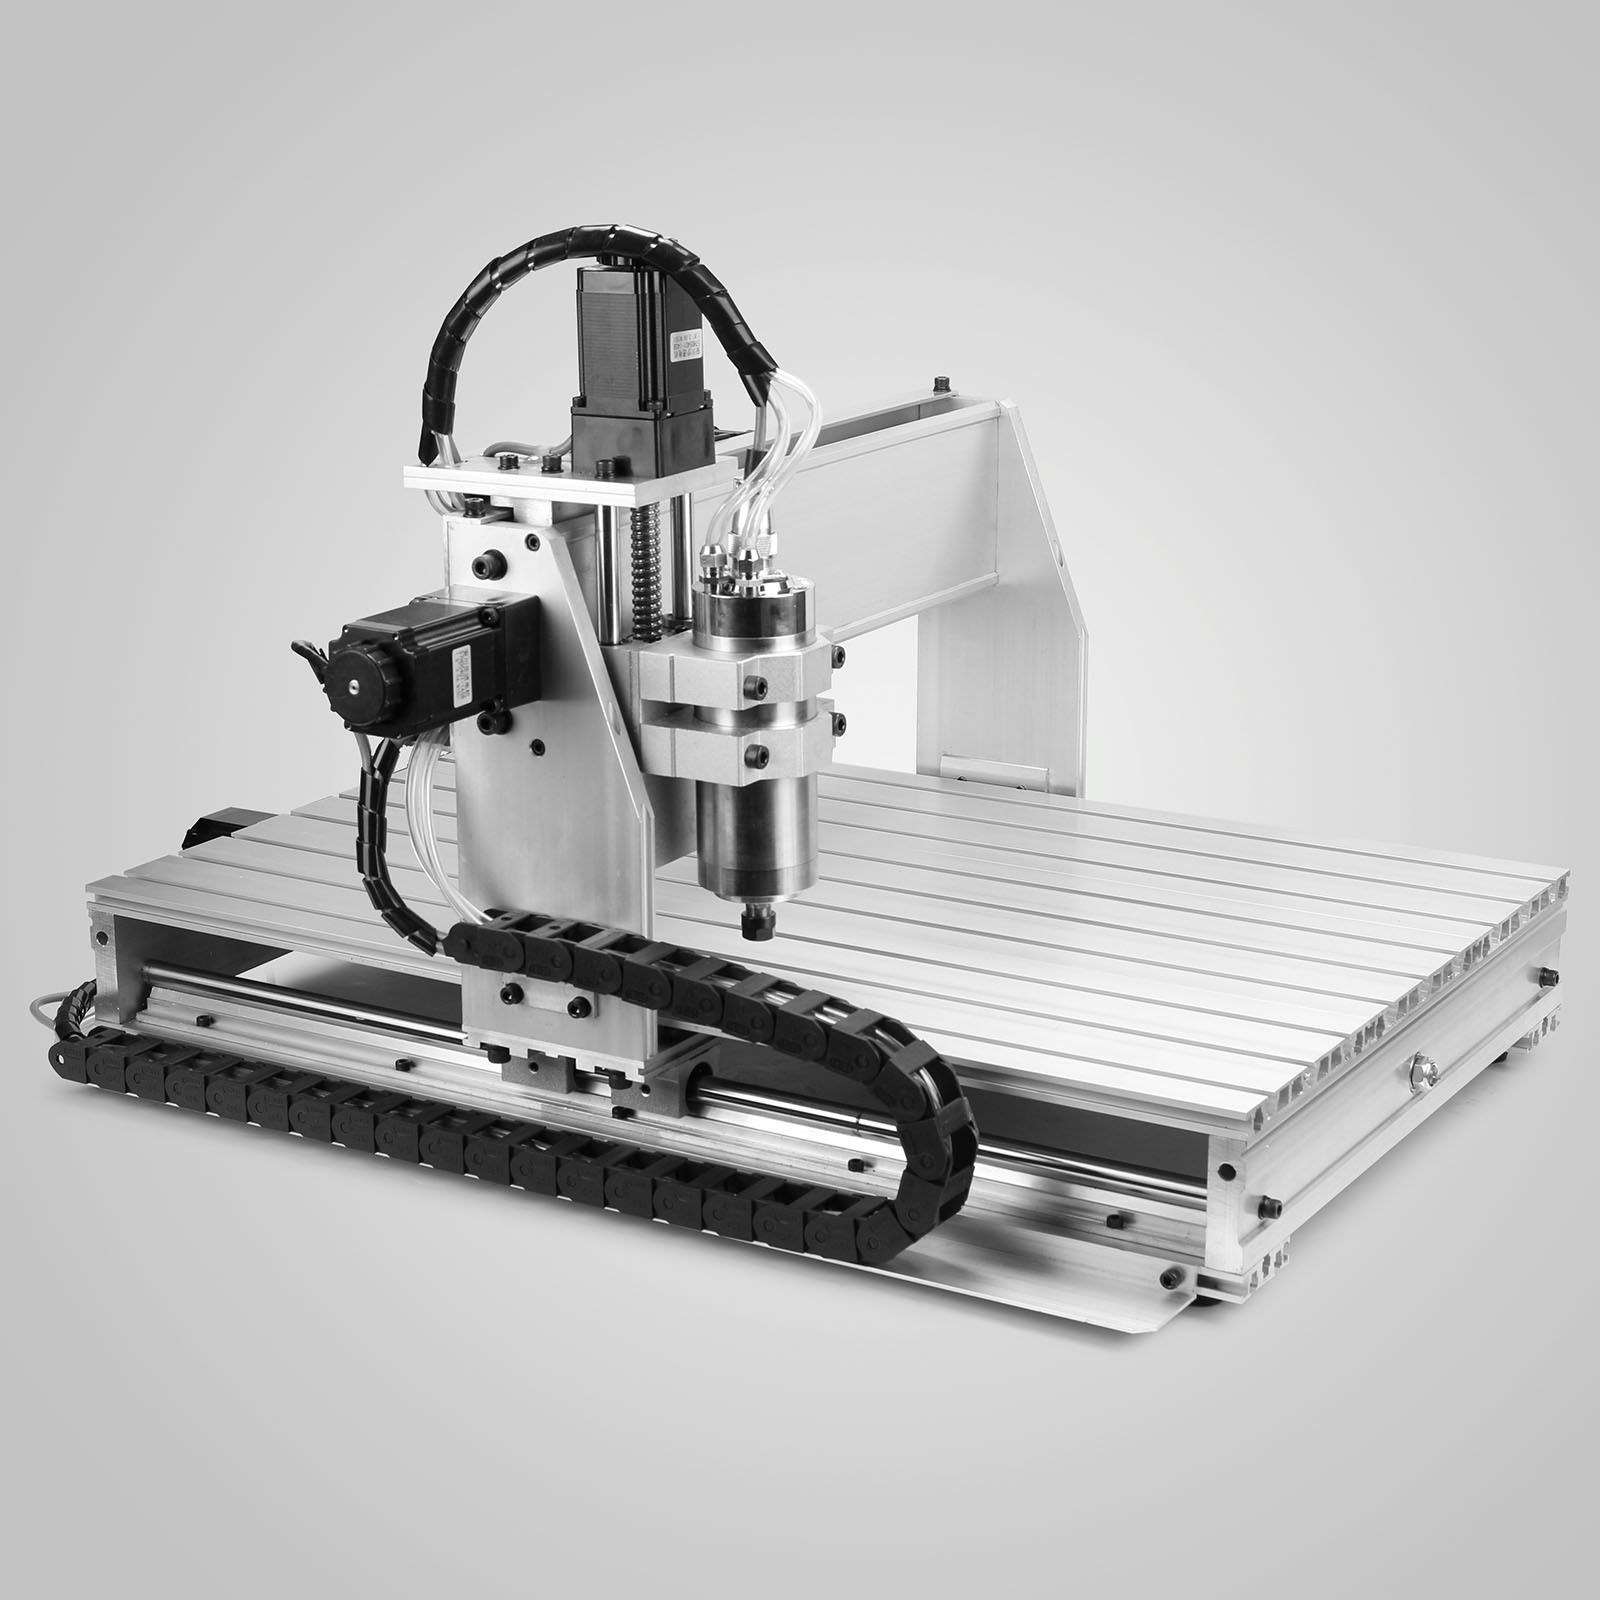 Cnc 6040z 3 Axis Motors Router Engraver Engraving Drilling Milling Machine 1500w Ebay